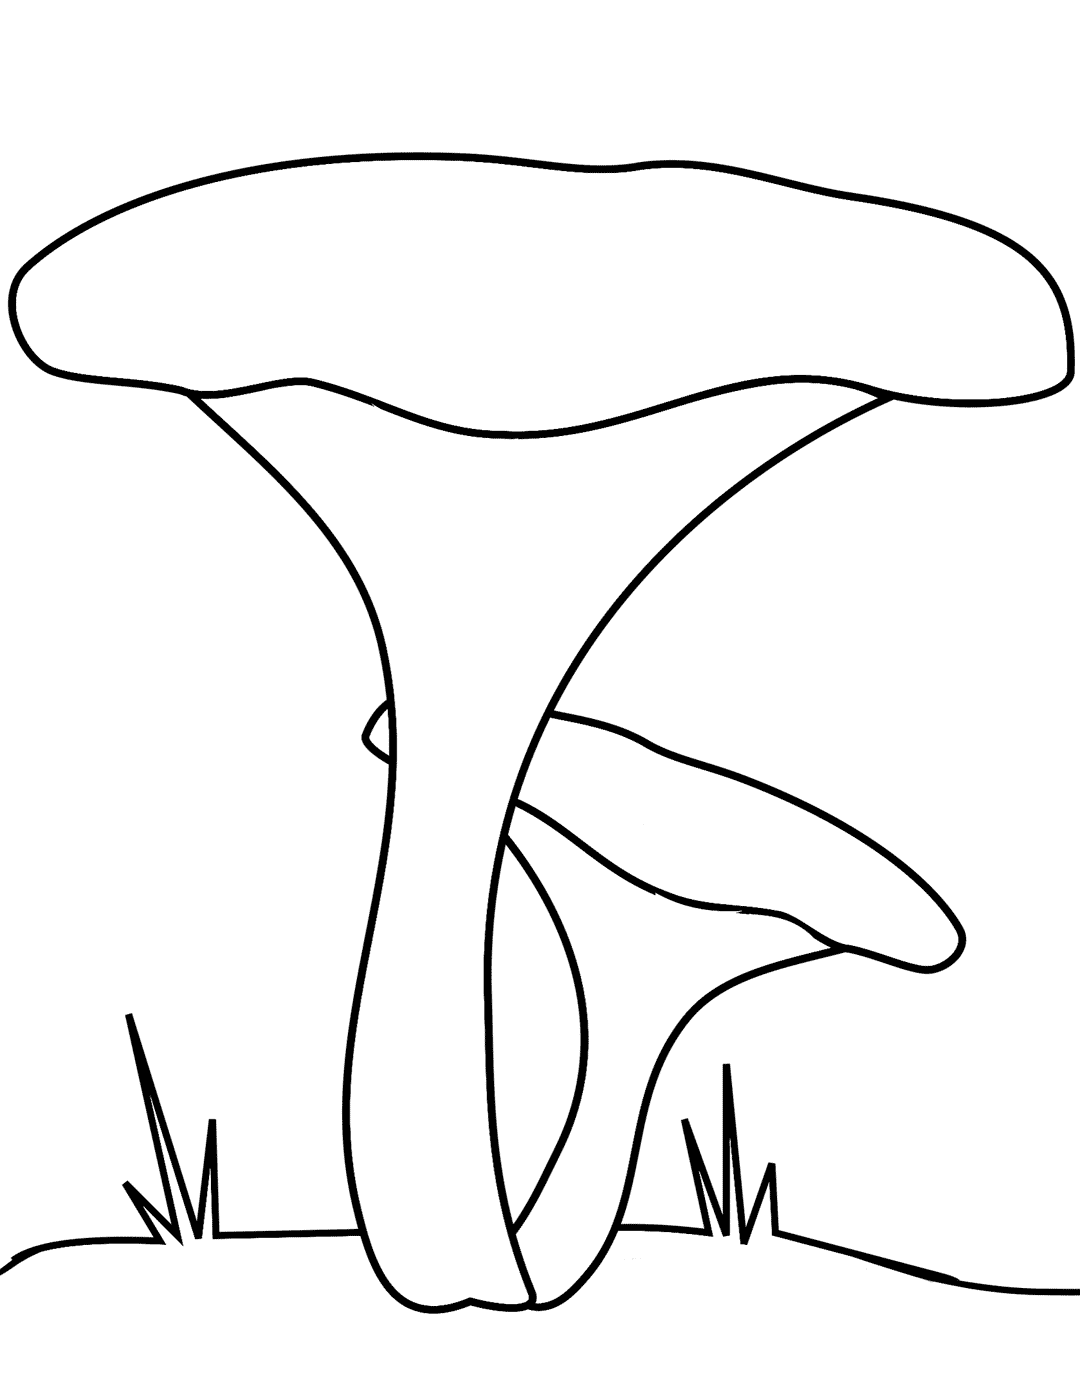 Easy Mushroom Lineart Coloring Page